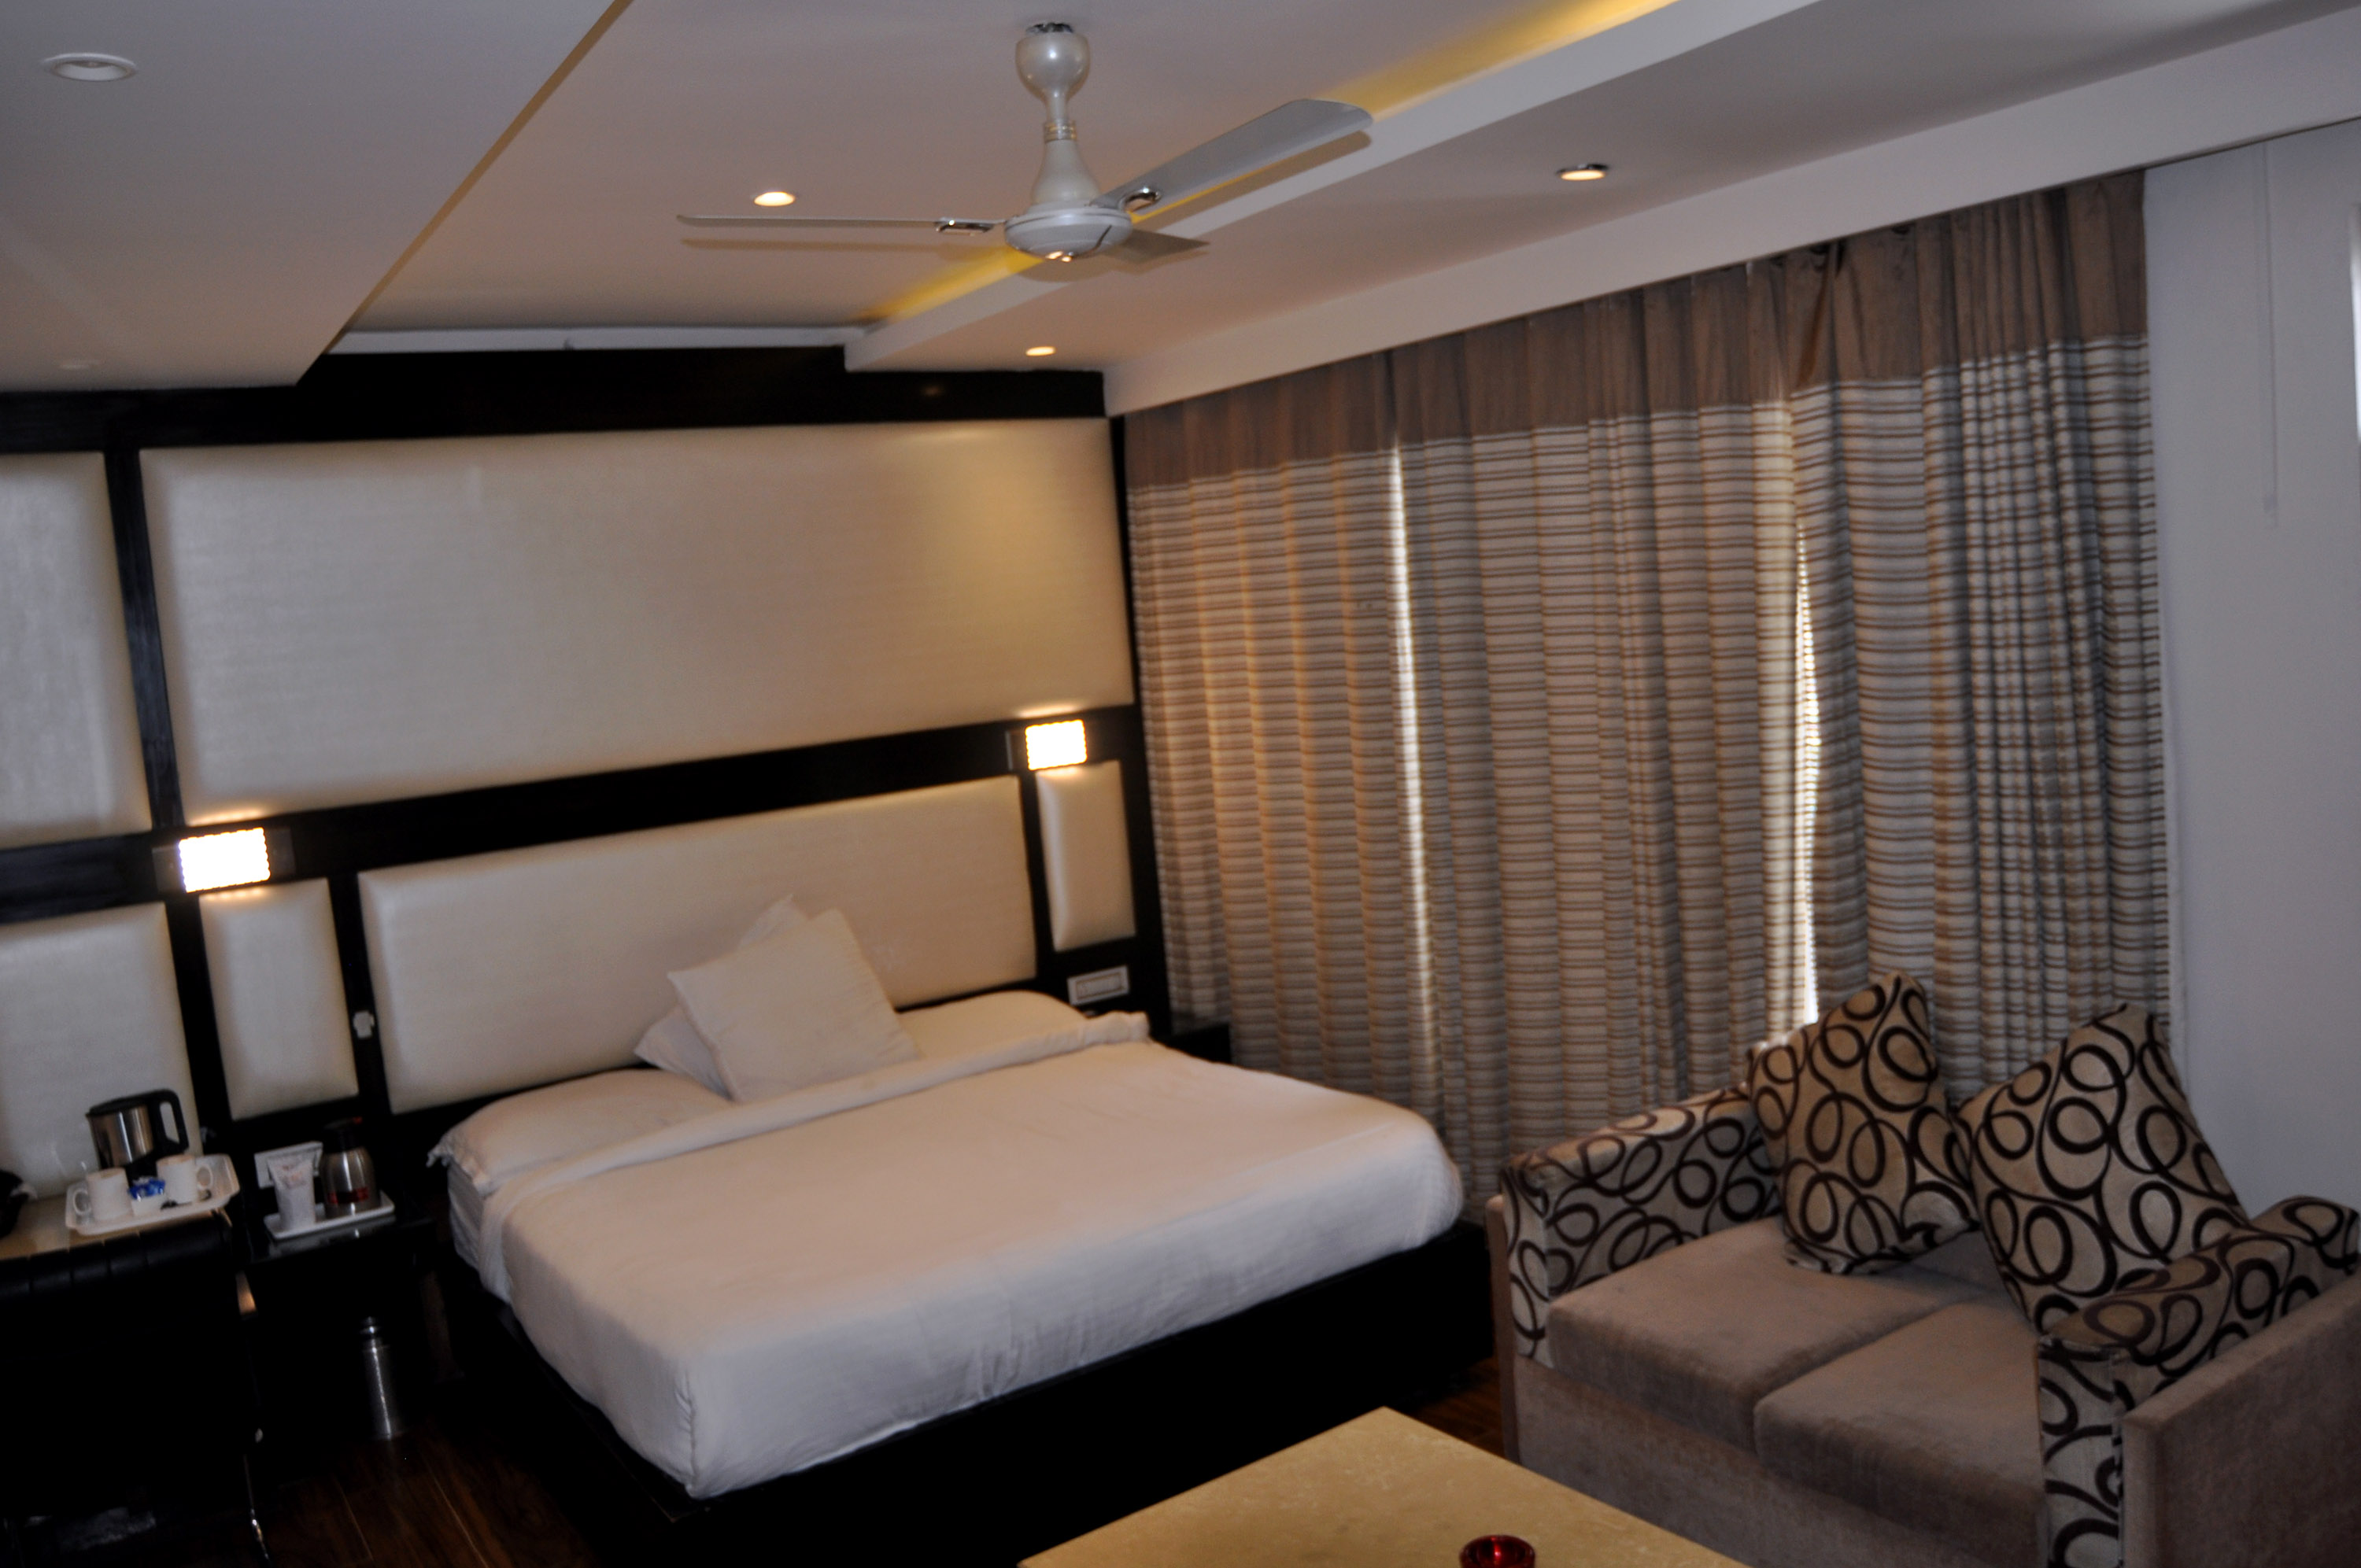 Our plush Penthouse bedroom designed for those who appreciate luxury living